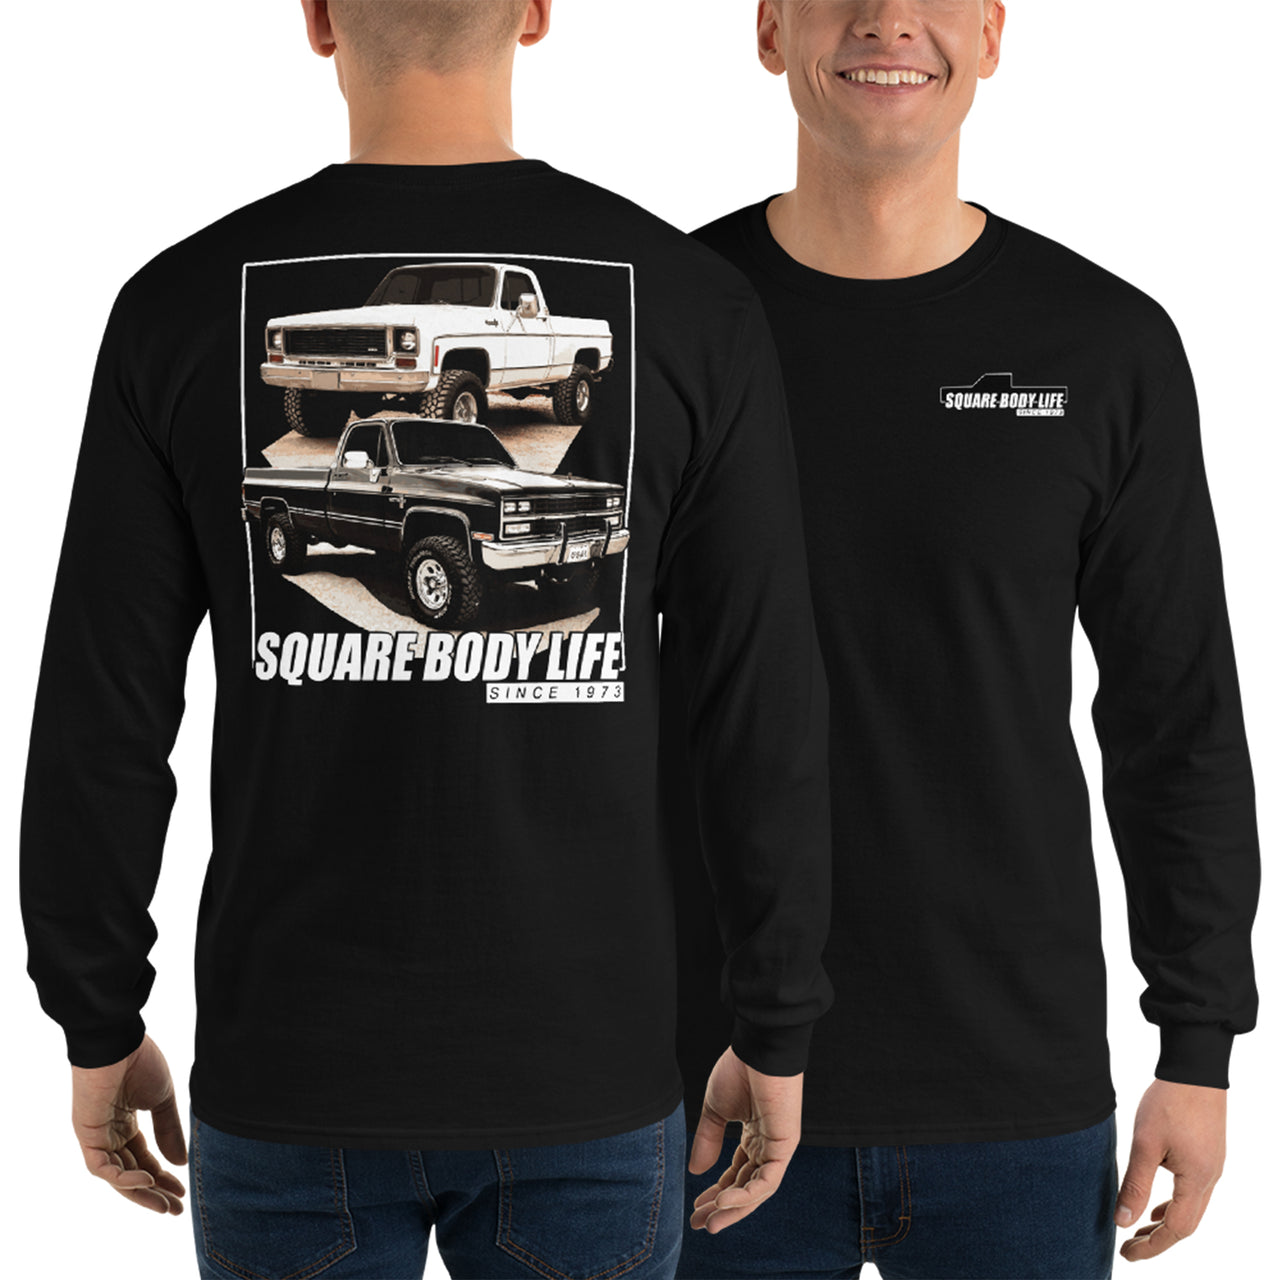 Square Body Life Long Sleeve T-Shirt modeled in black